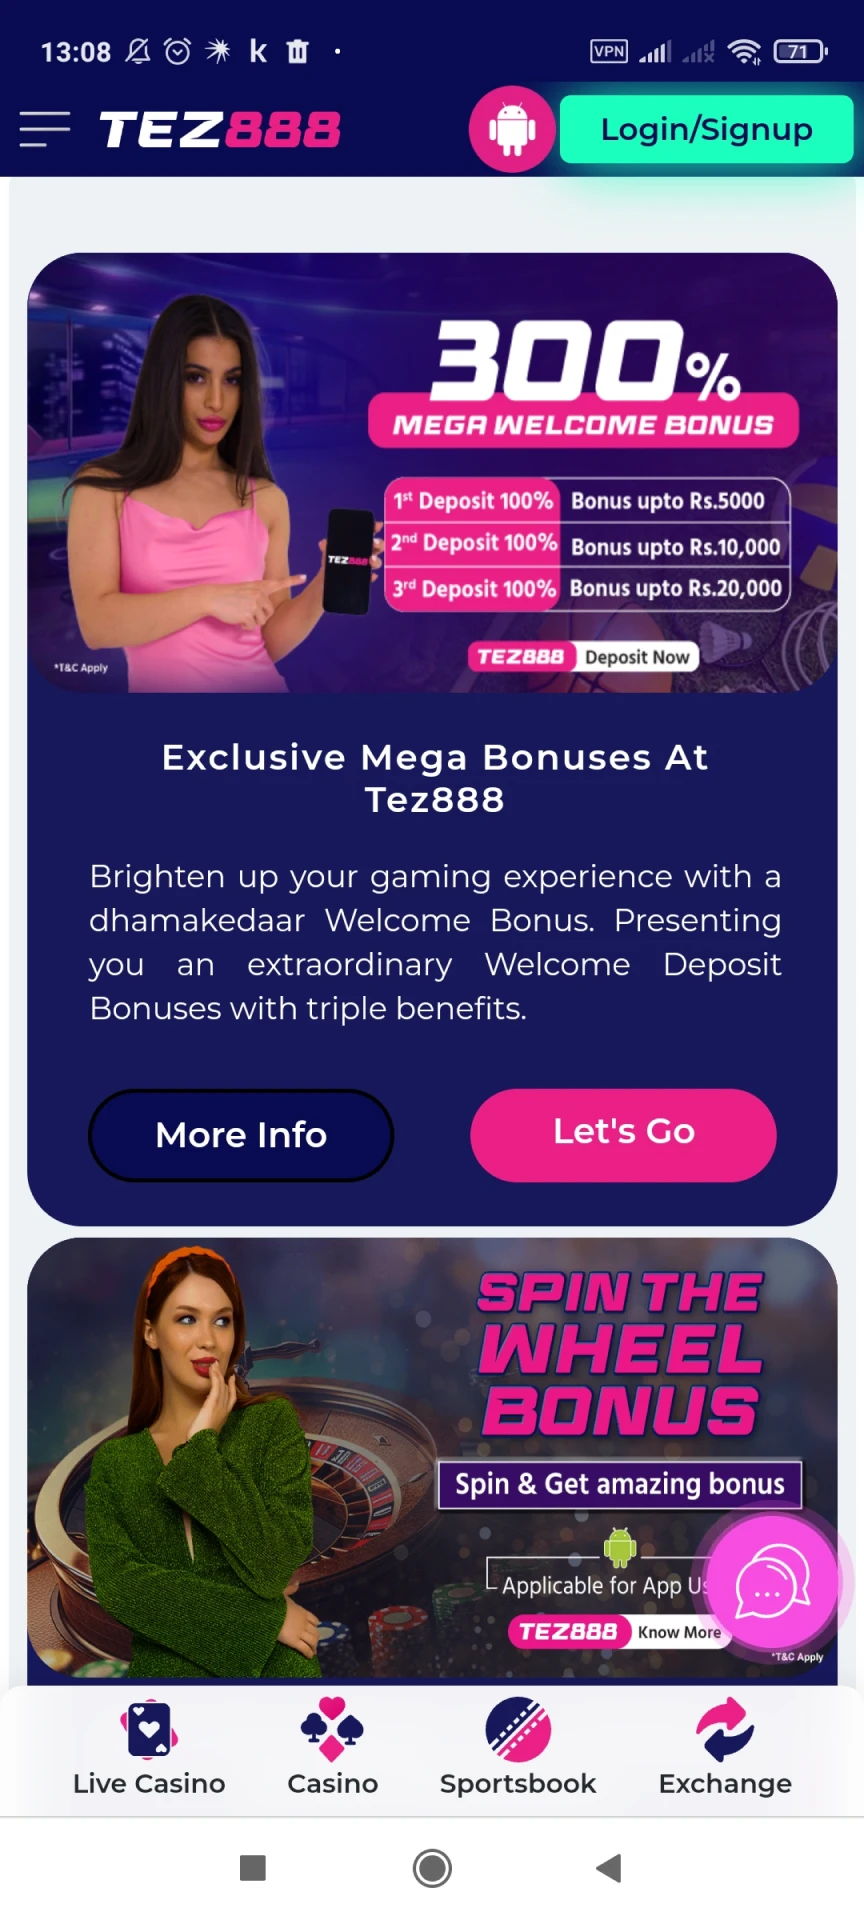 Visit the page with bonuses in the Tez888 application.